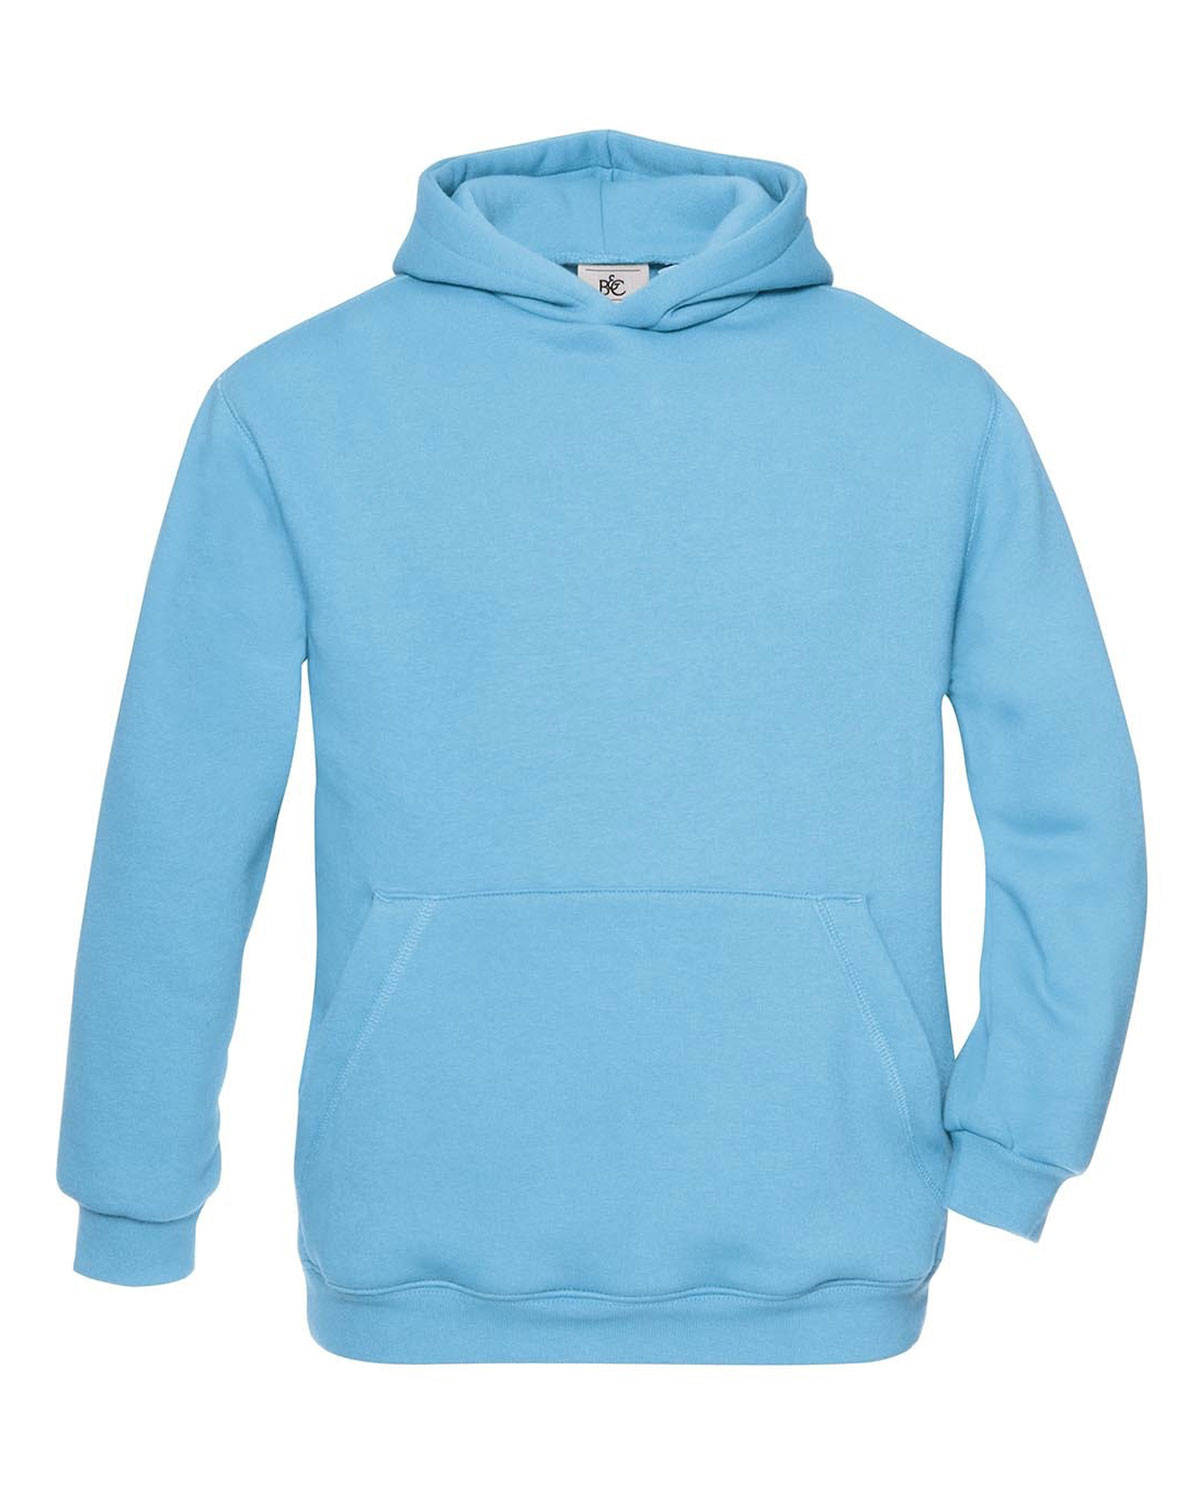 Hooded /kids Very Turquoise 152/164